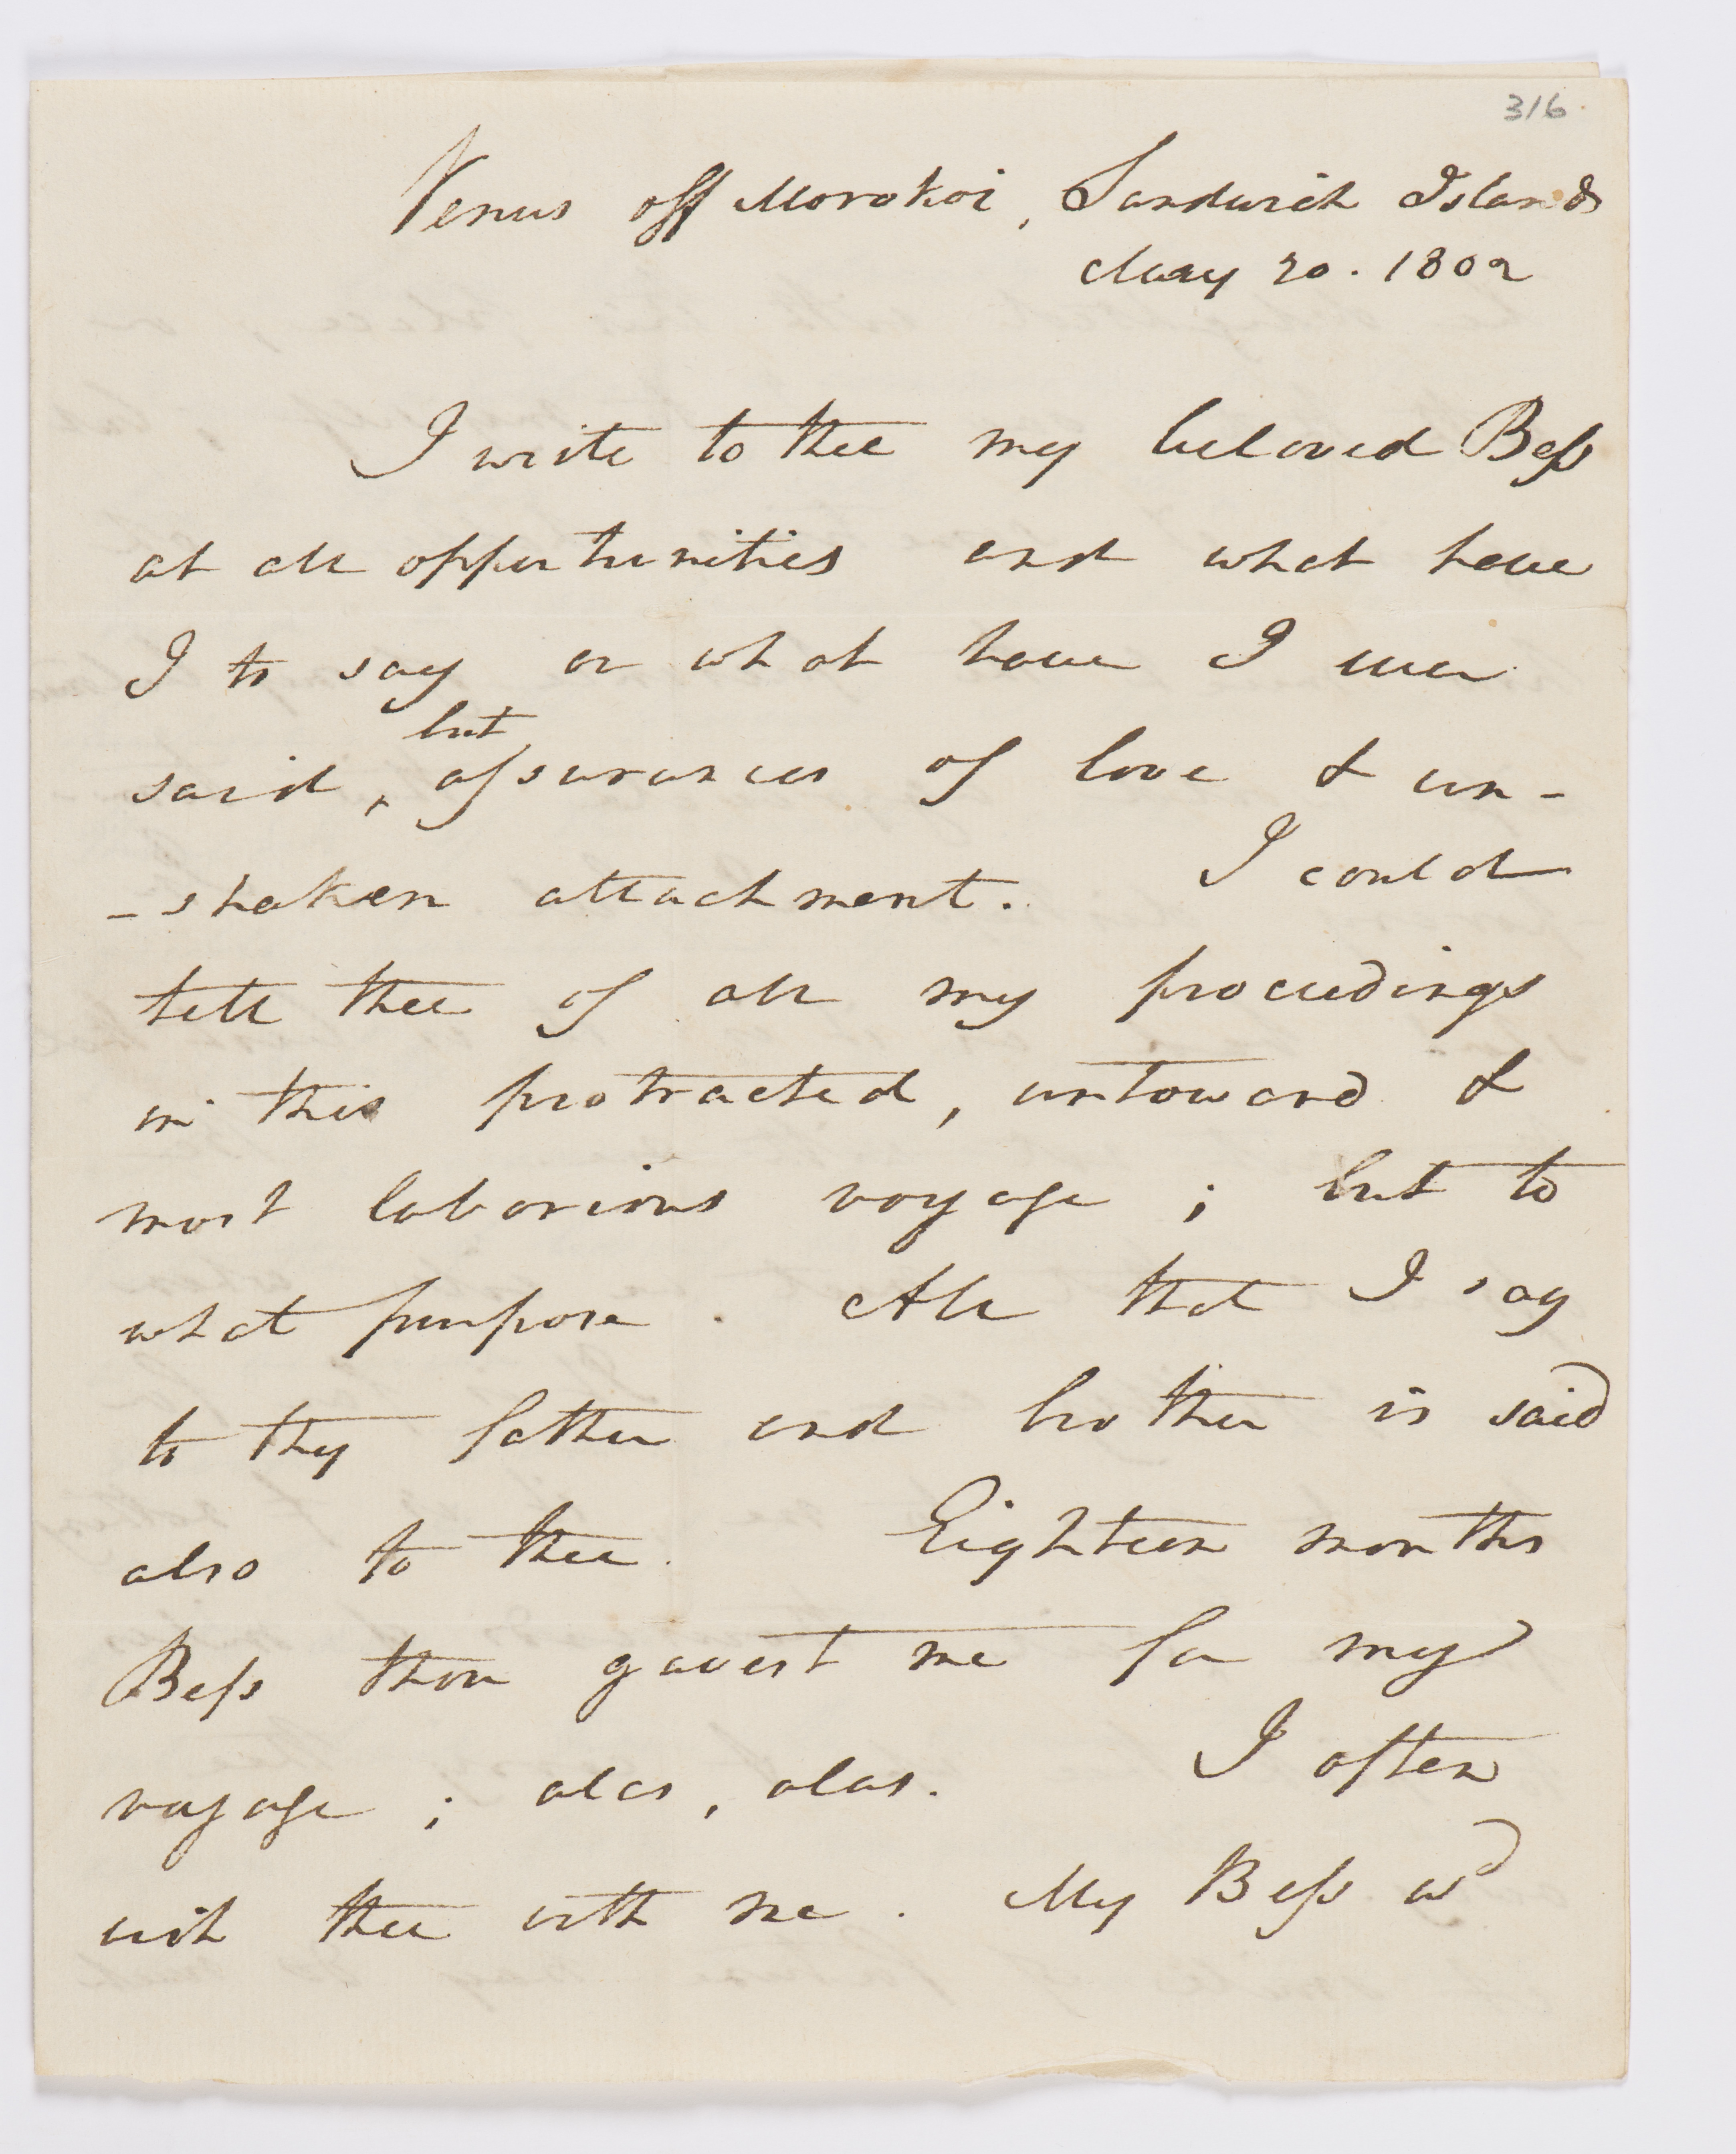 Image of a letter from George Bass to Freda